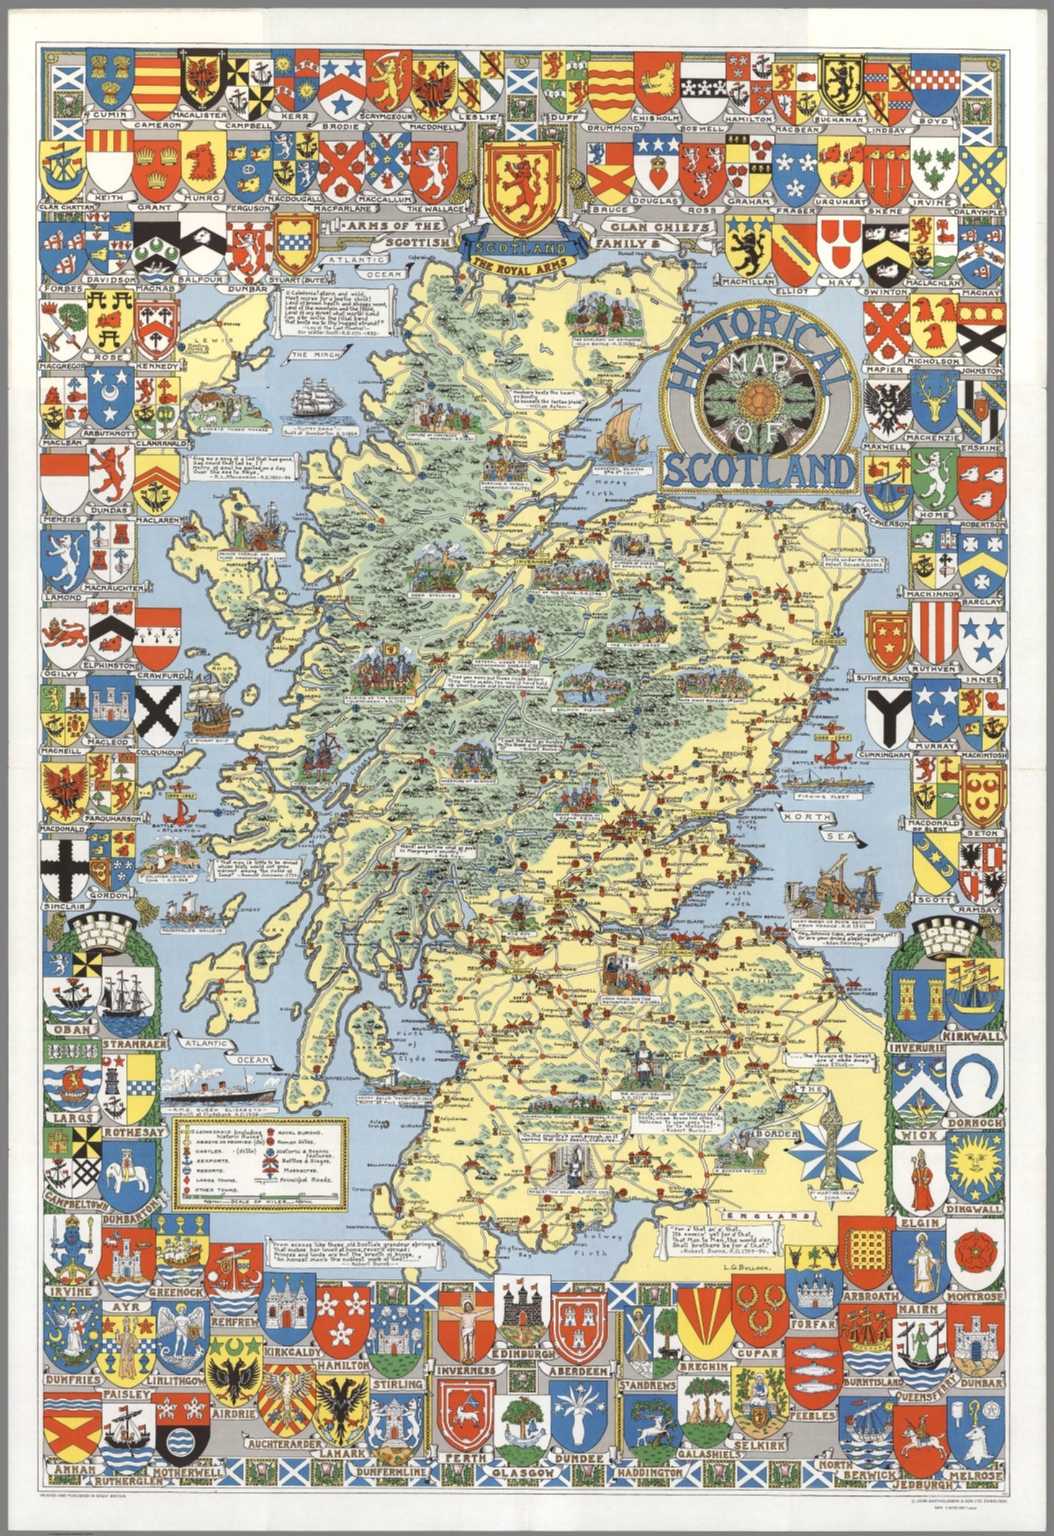 Historical Scotland By L G Bullock David Rumsey Historical Map Collection